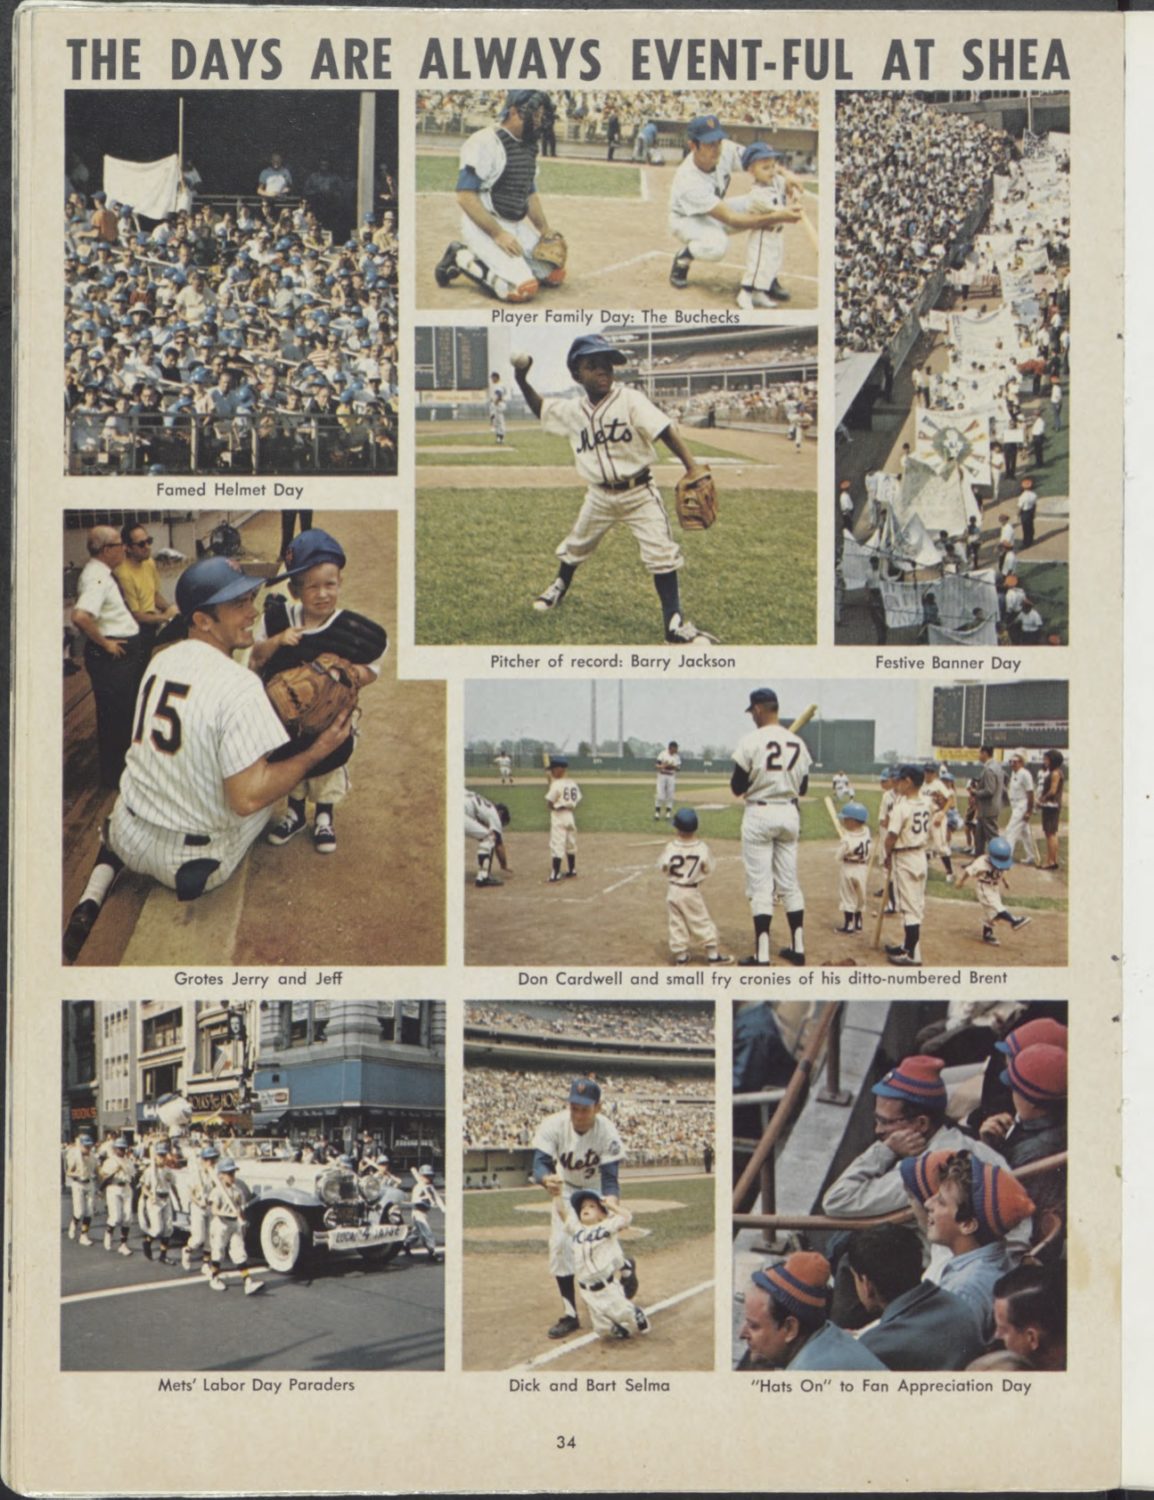 1969 Mets Yearbook: Events at Shea